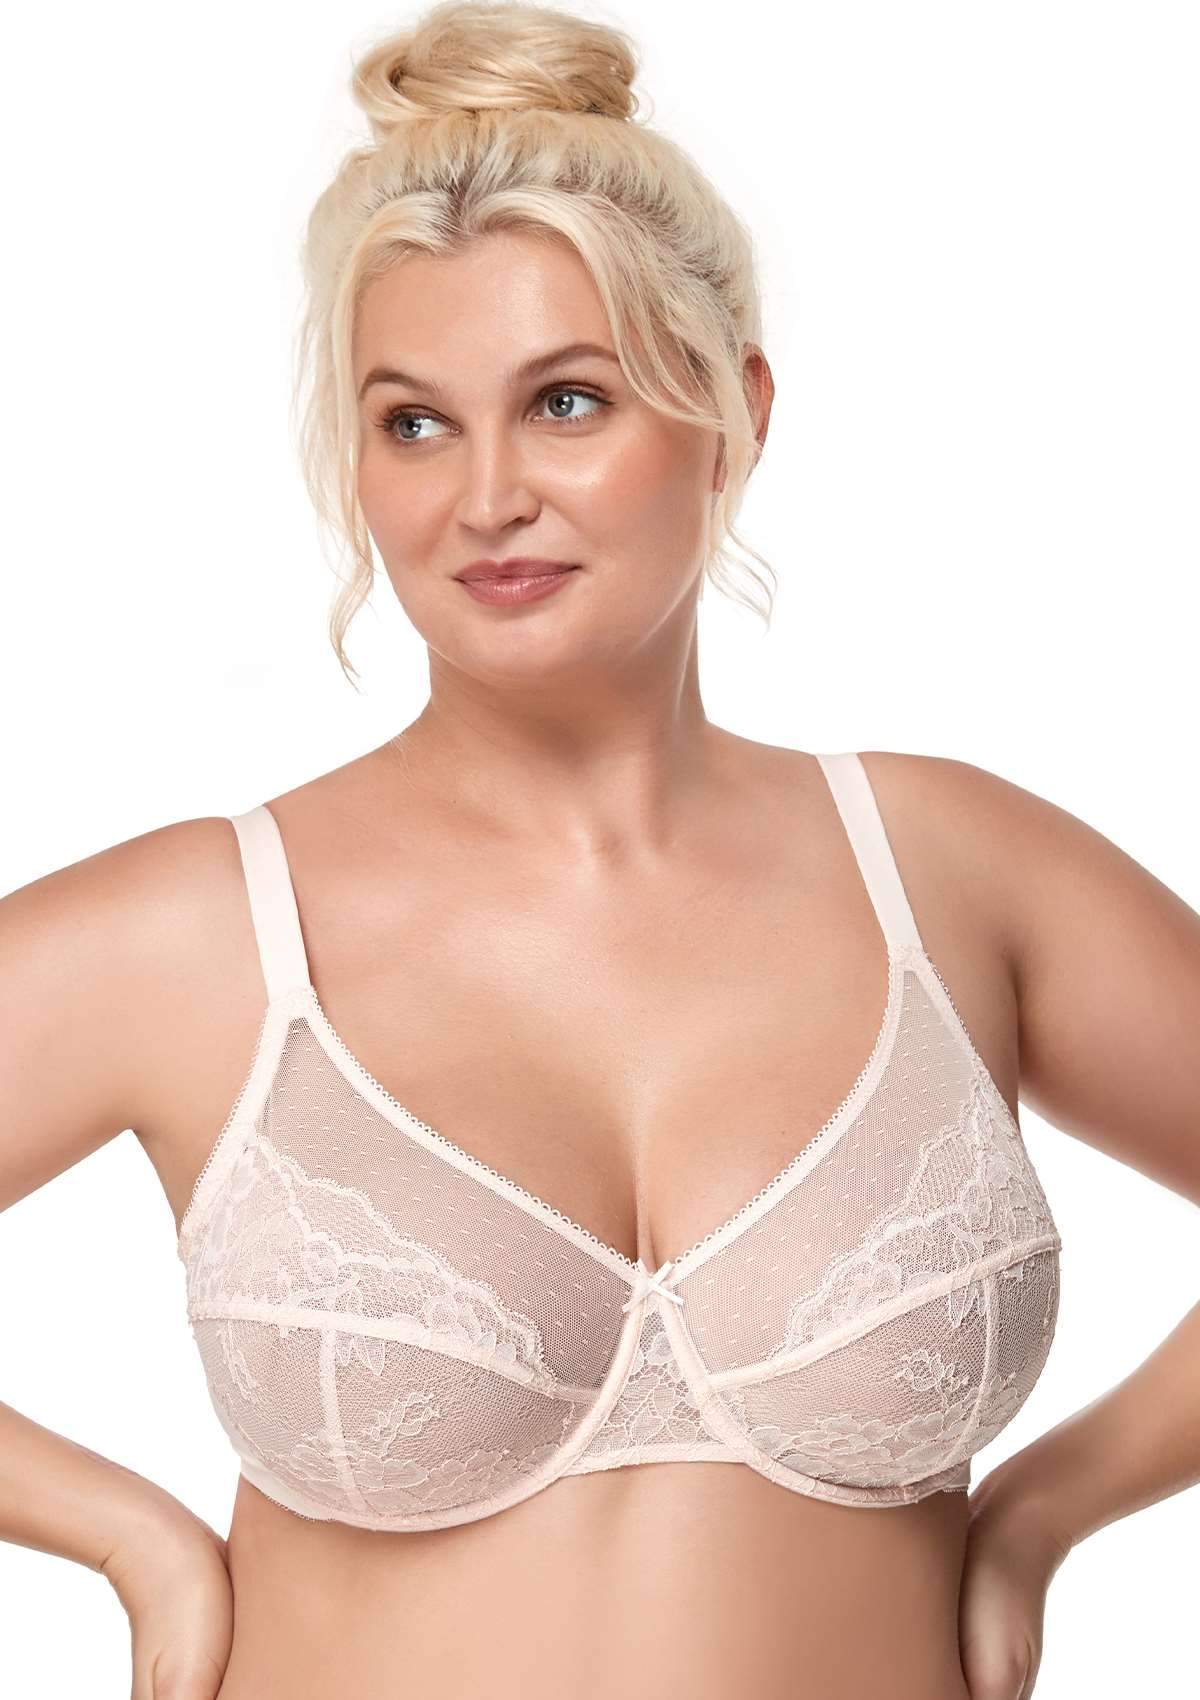 HSIA Enchante Lacy Bra: Comfy Sheer Lace Bra With Lift - Dusty Peach / 36 / H